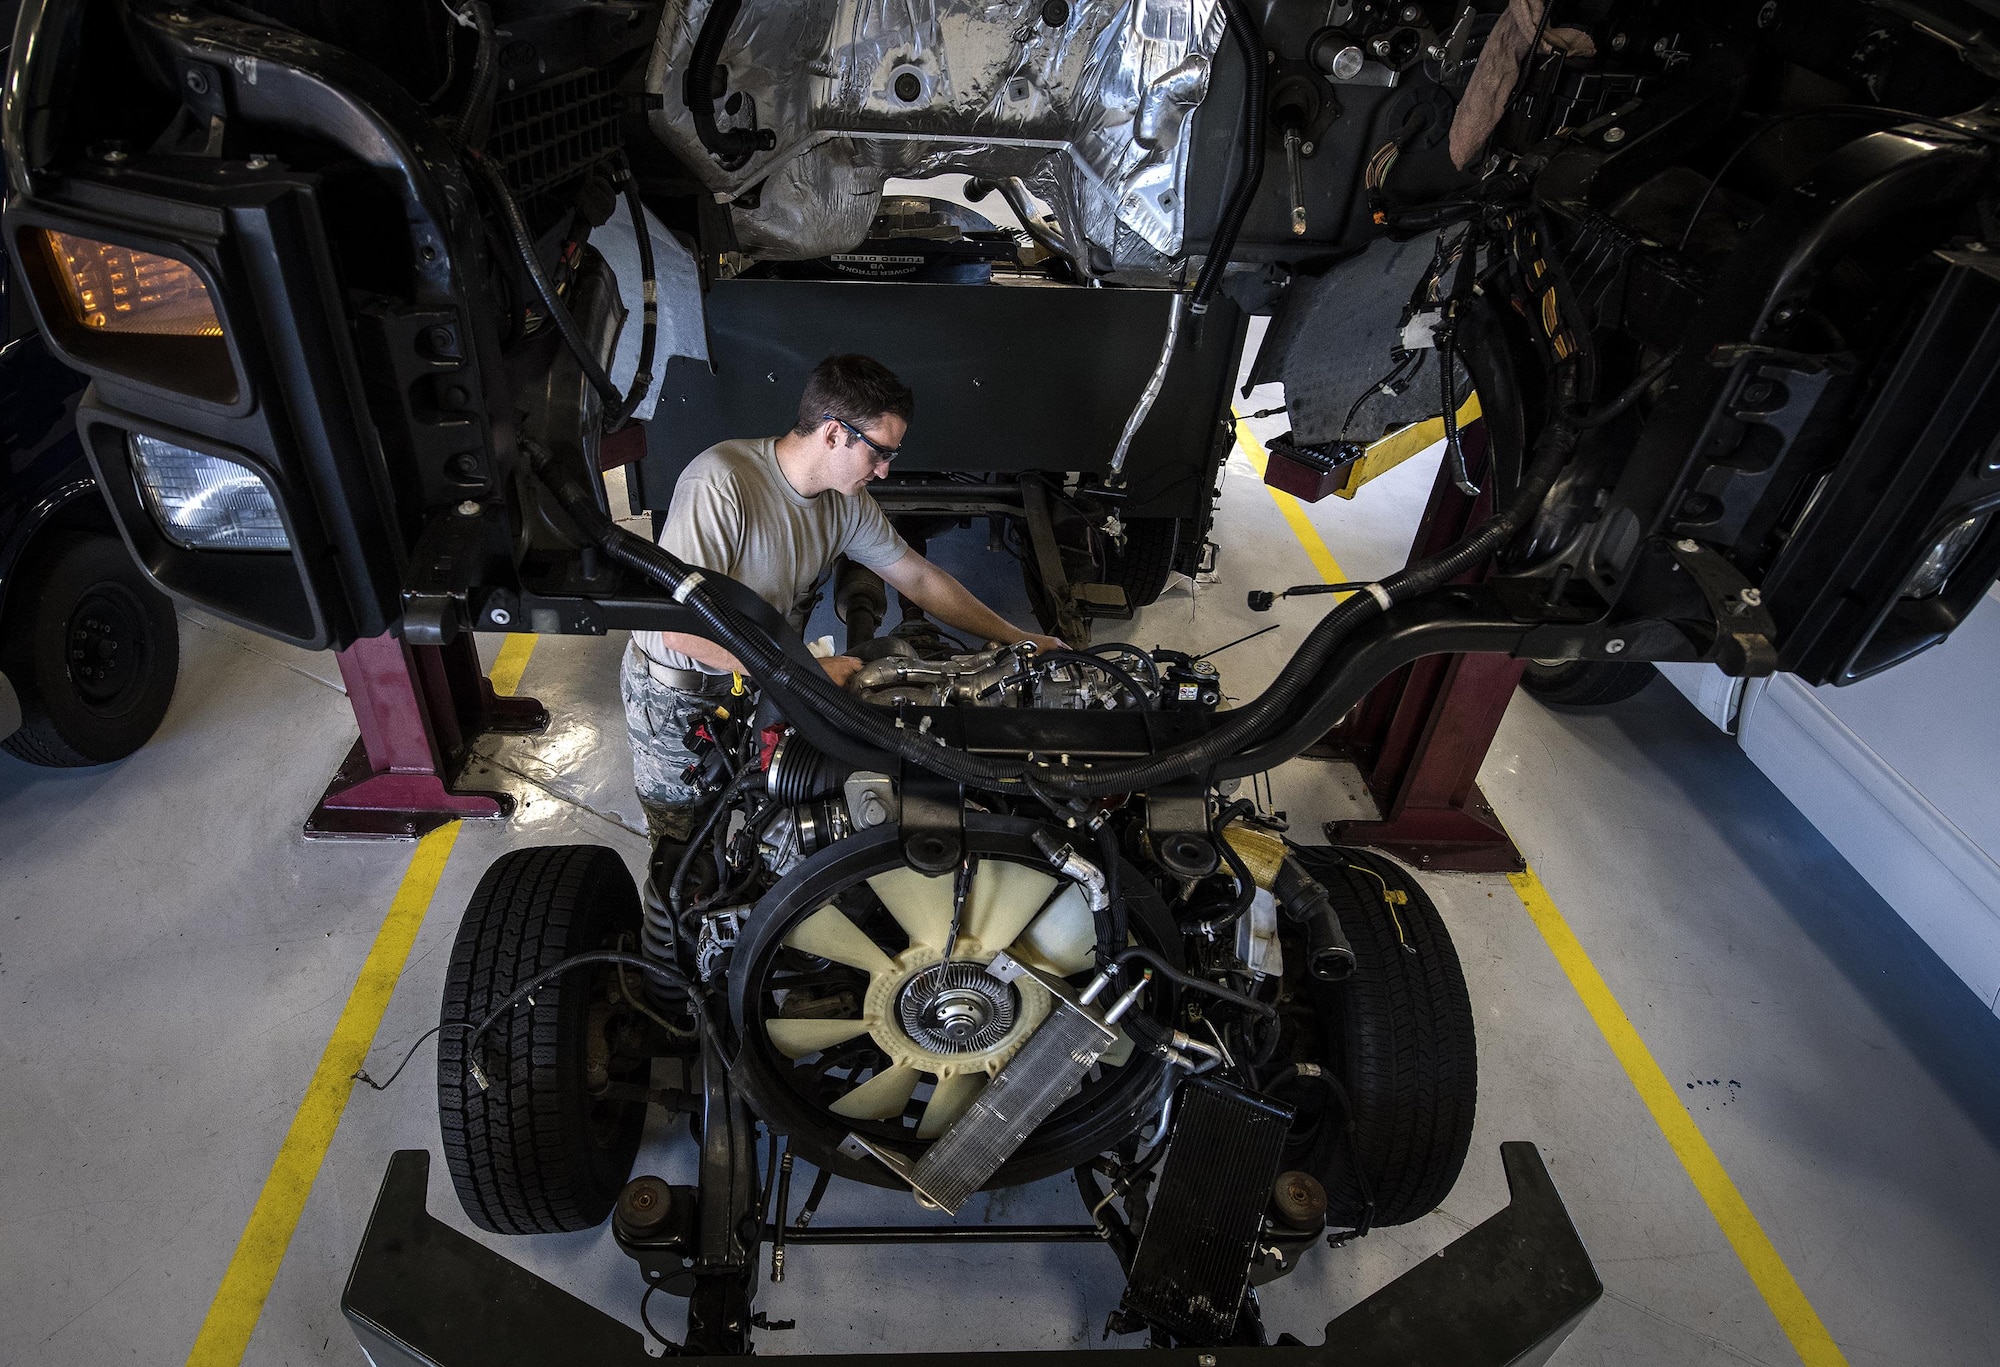 Senior Airman Corbin Mellor, 23d Logistics Readiness Squadron vehicle maintenance technician, checks the wiring on a vehicle, Oct. 20, 2016, at Moody Air Force Base, Ga. Technicians had to remove the cabin of the truck in order to replace the cylinder head and gaskets. (U.S. Air Force photo by Airman 1st Class Janiqua P. Robinson)